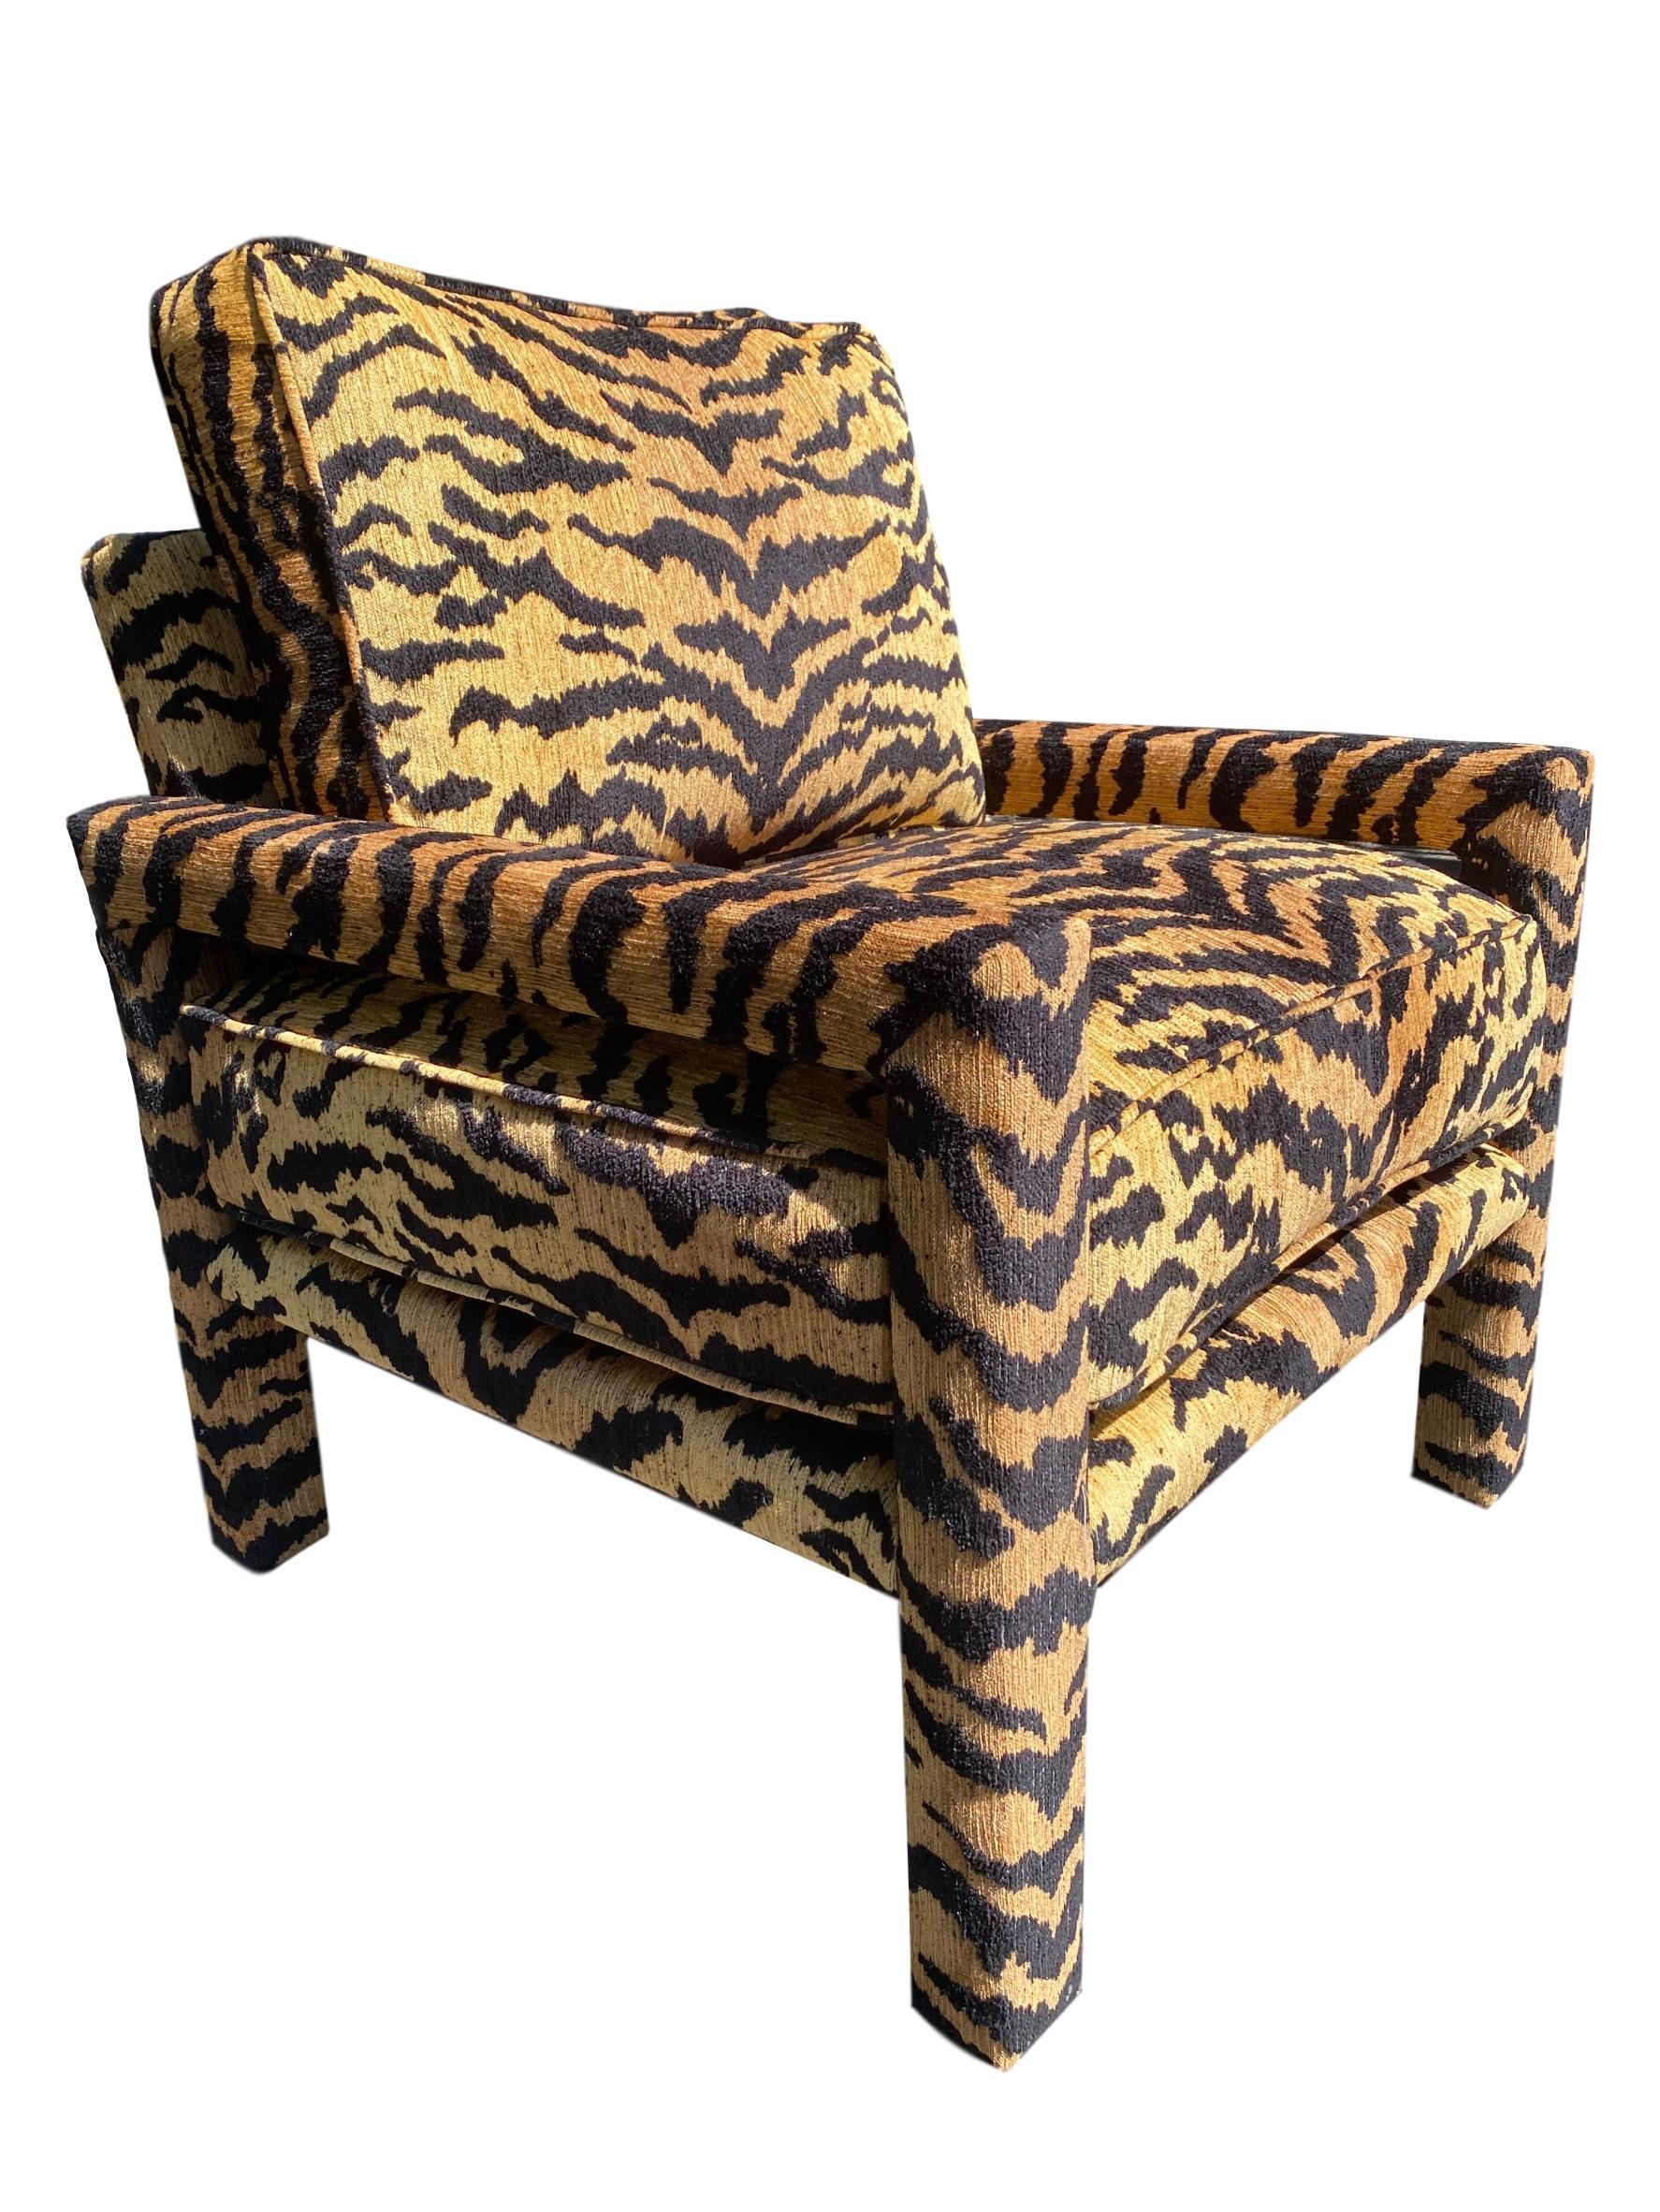 Hand-Crafted Pair of New Milo Baughman Style Parsons Chairs in Designer Tiger Fabric